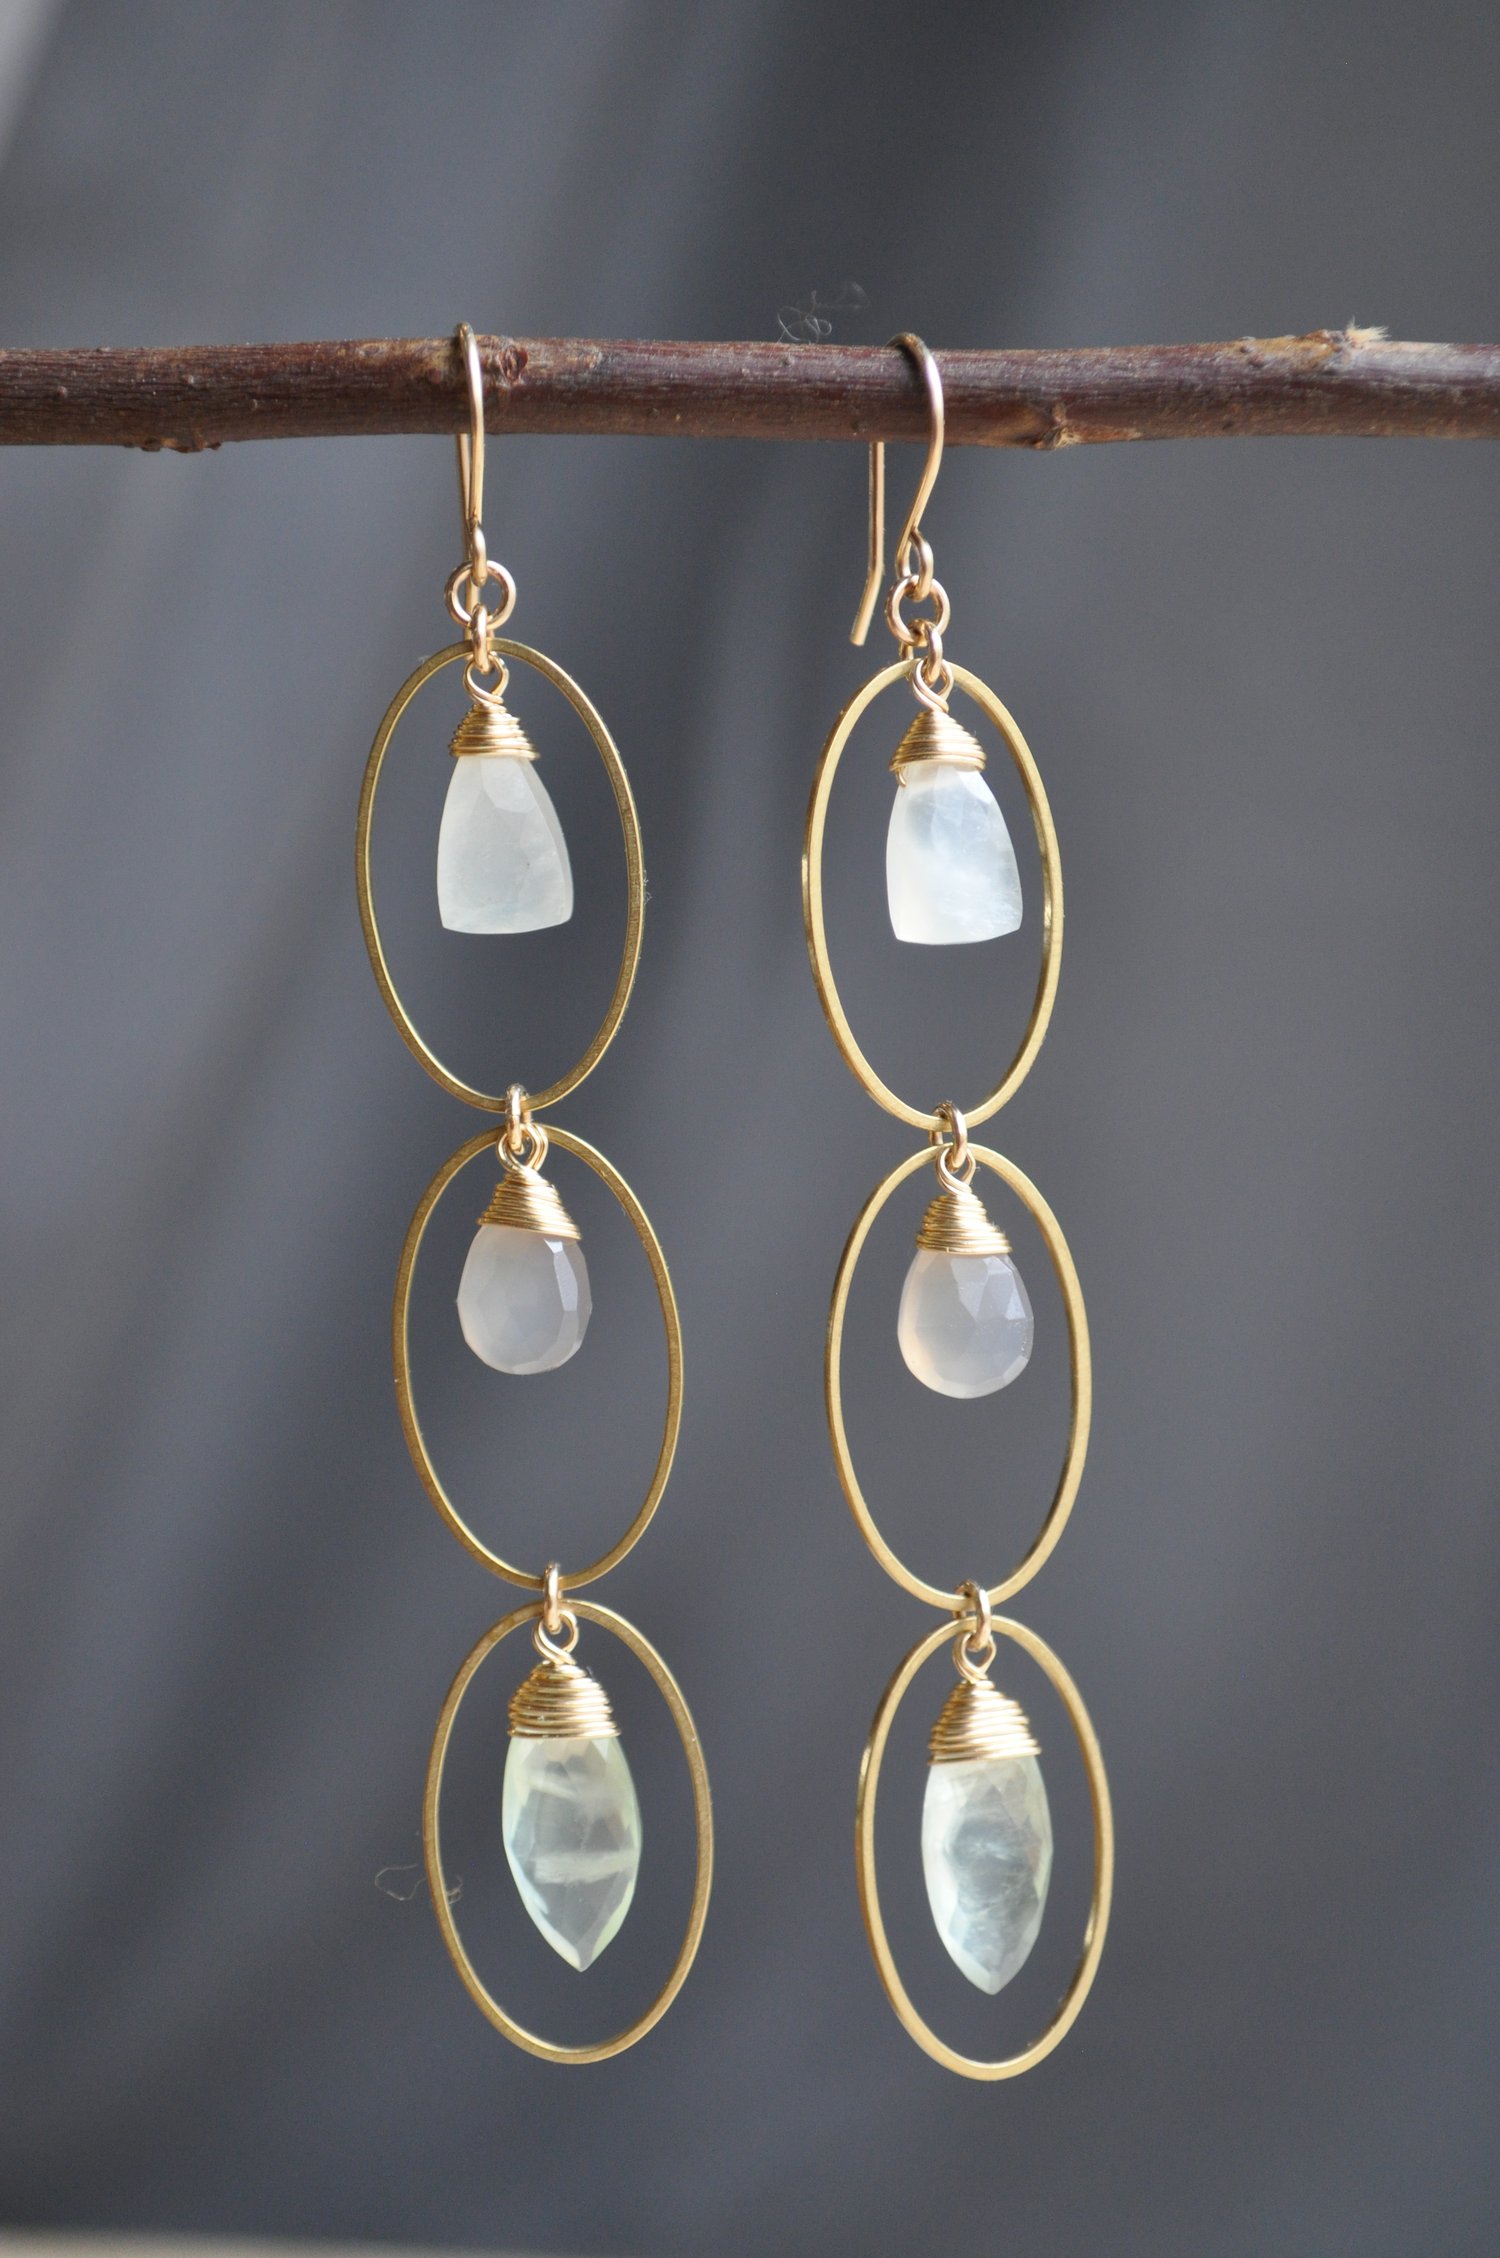 Image of Triple Oval Dangles in Moonstone, Gray Chalcedony and Prehnite